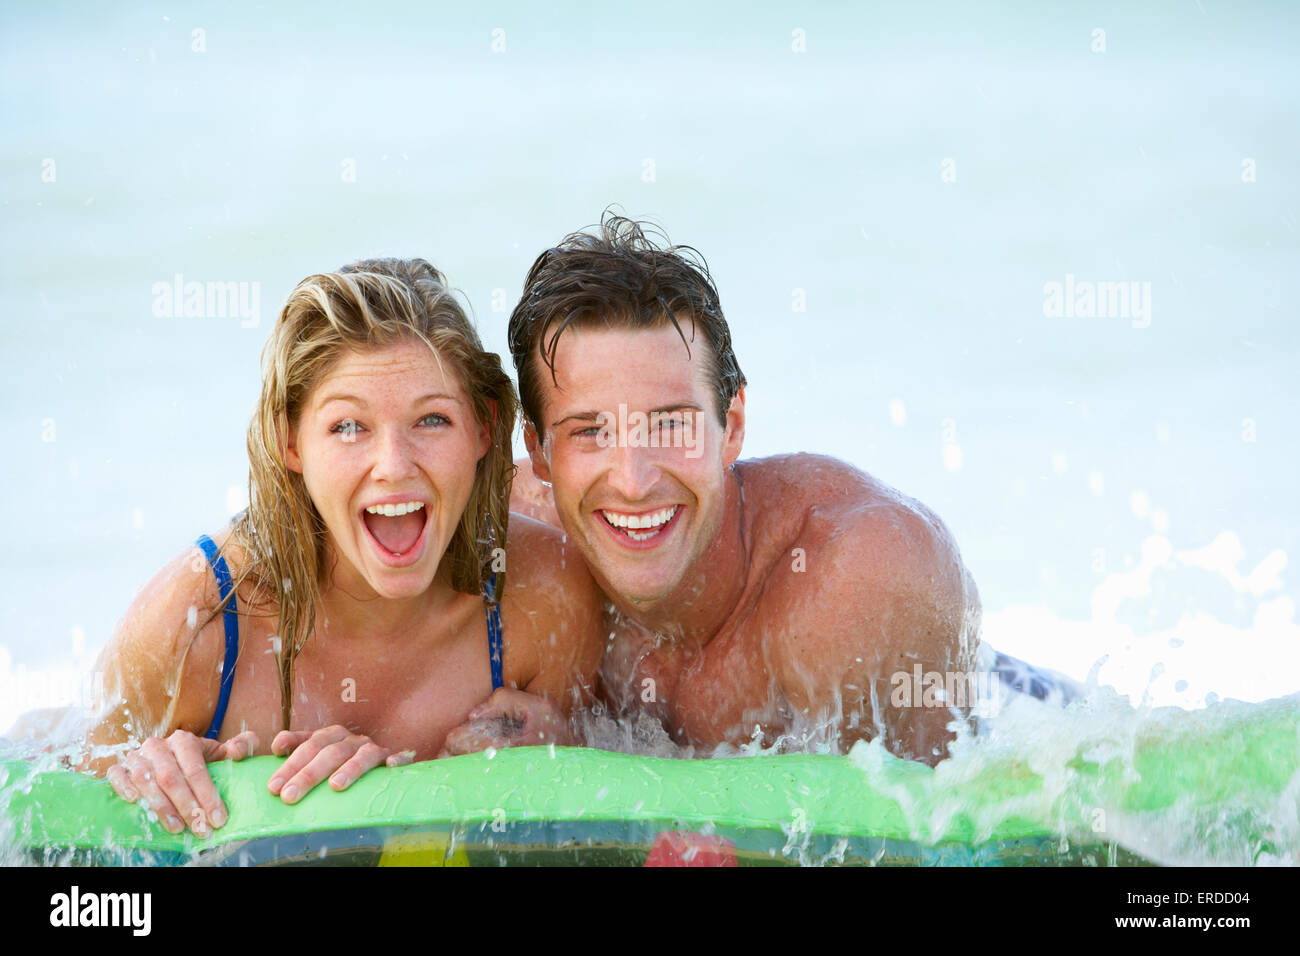 Young Couple Having Fun In Sea On Airbed Stock Photo